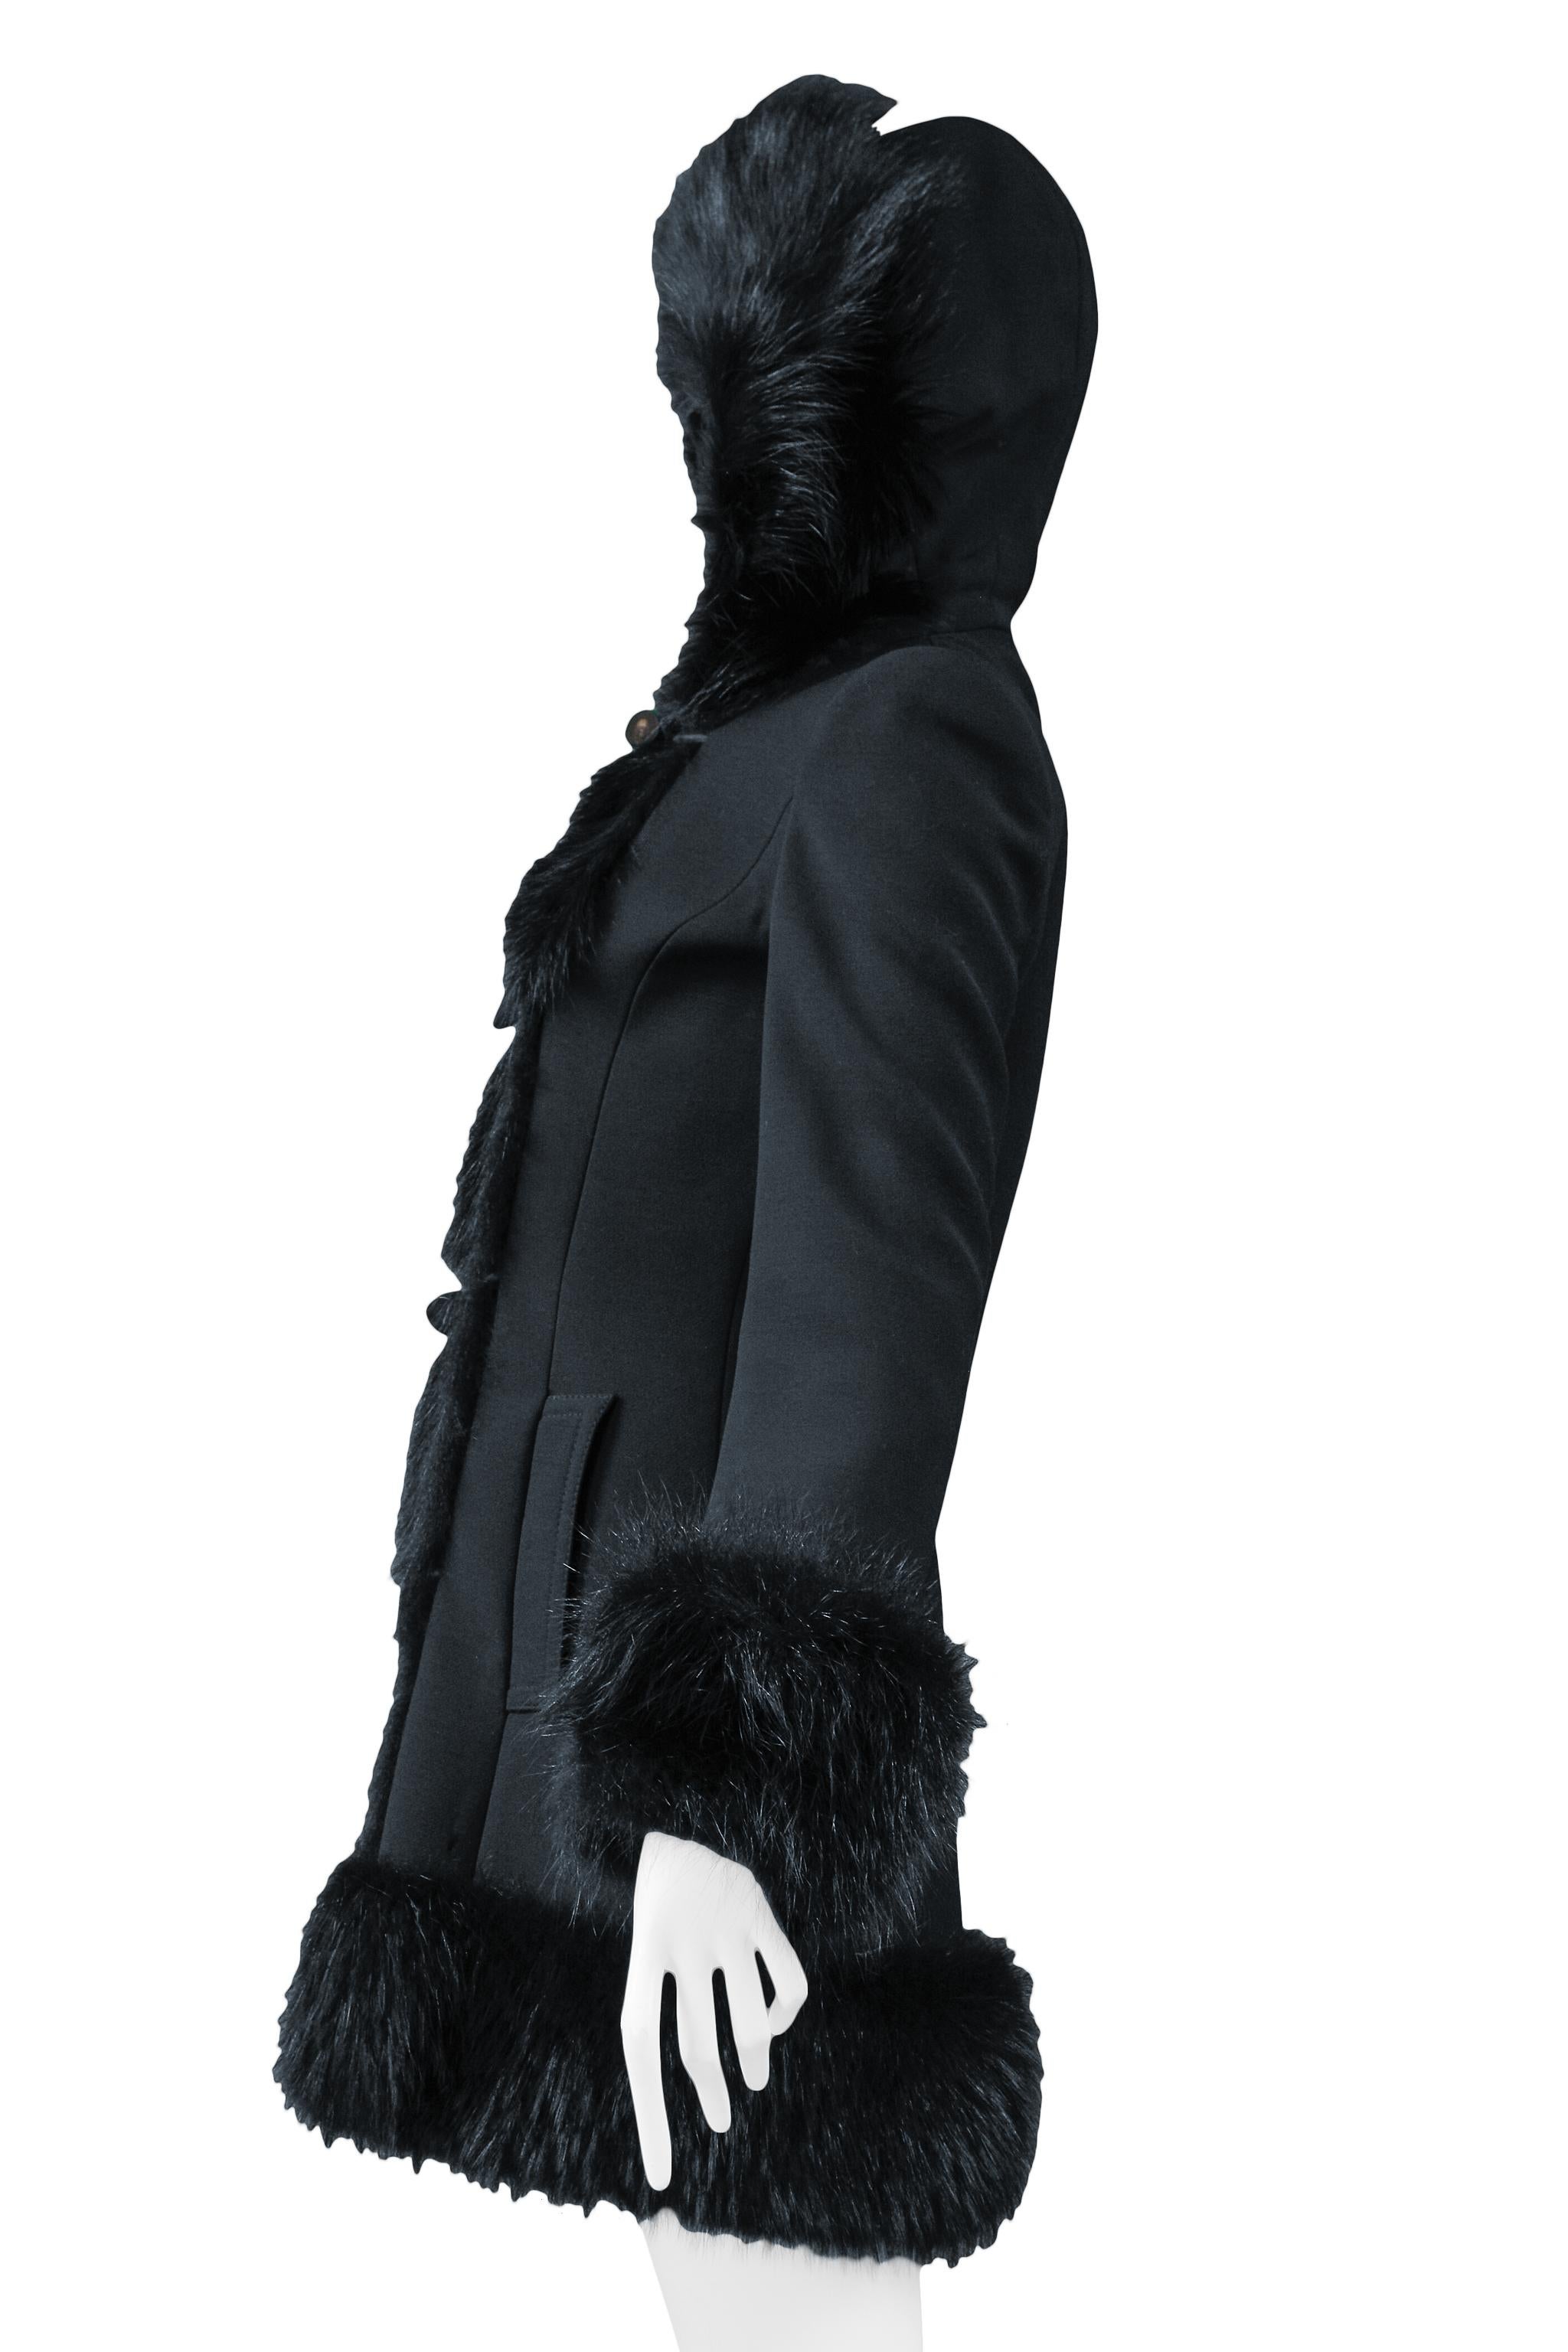 Dolce Black Wool Toggle Coat With Fur Trim Hood For Sale 1